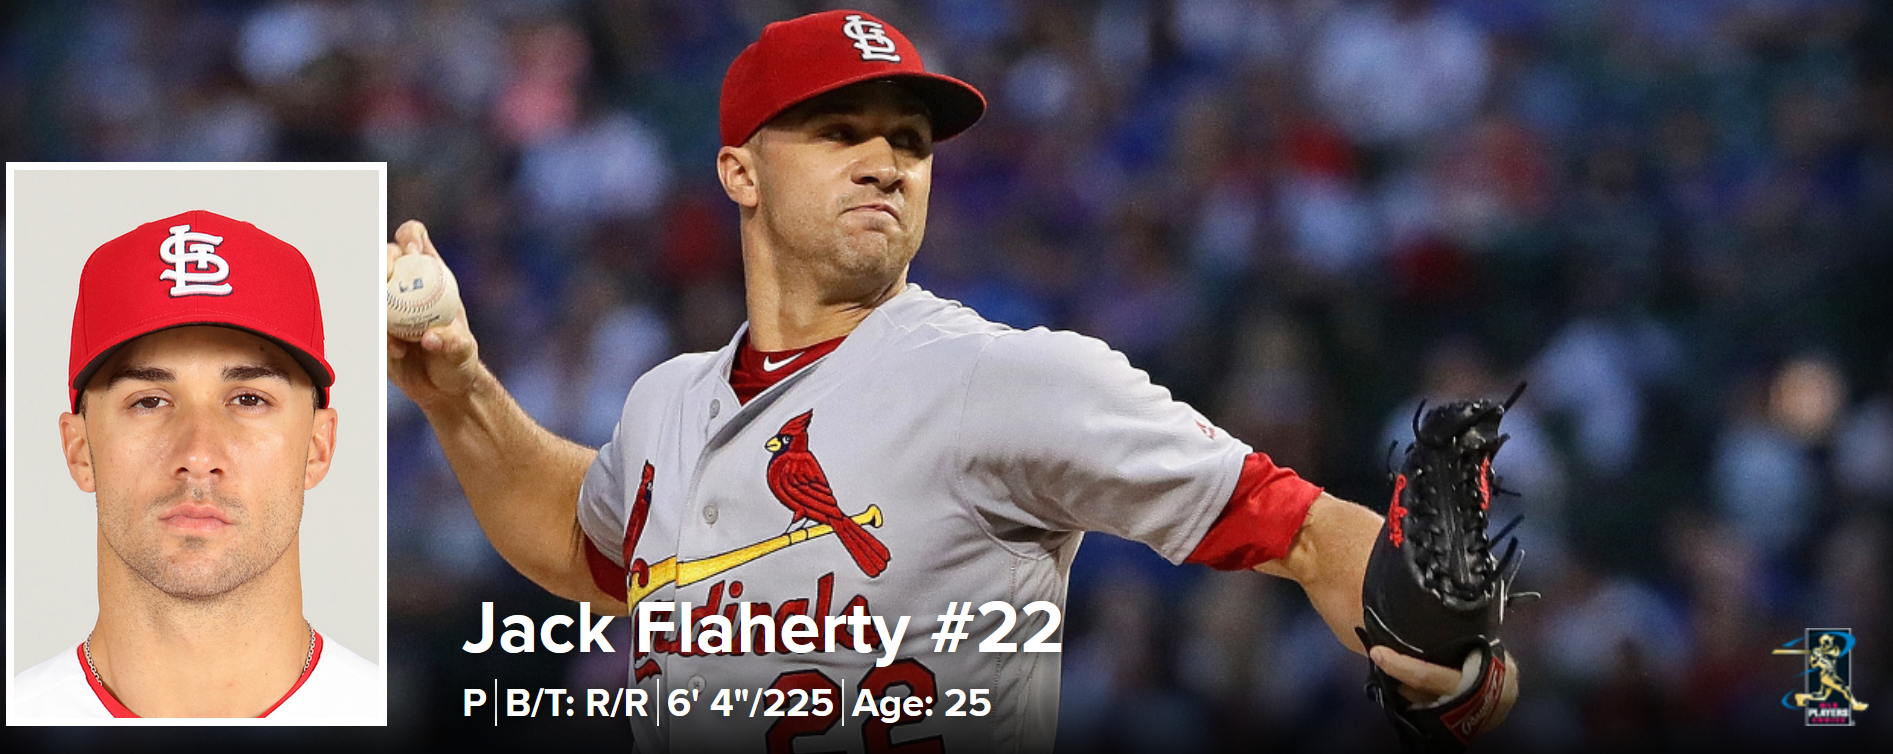 Tell Your Friends — jack flaherty!(pls like/reblog if you use!)